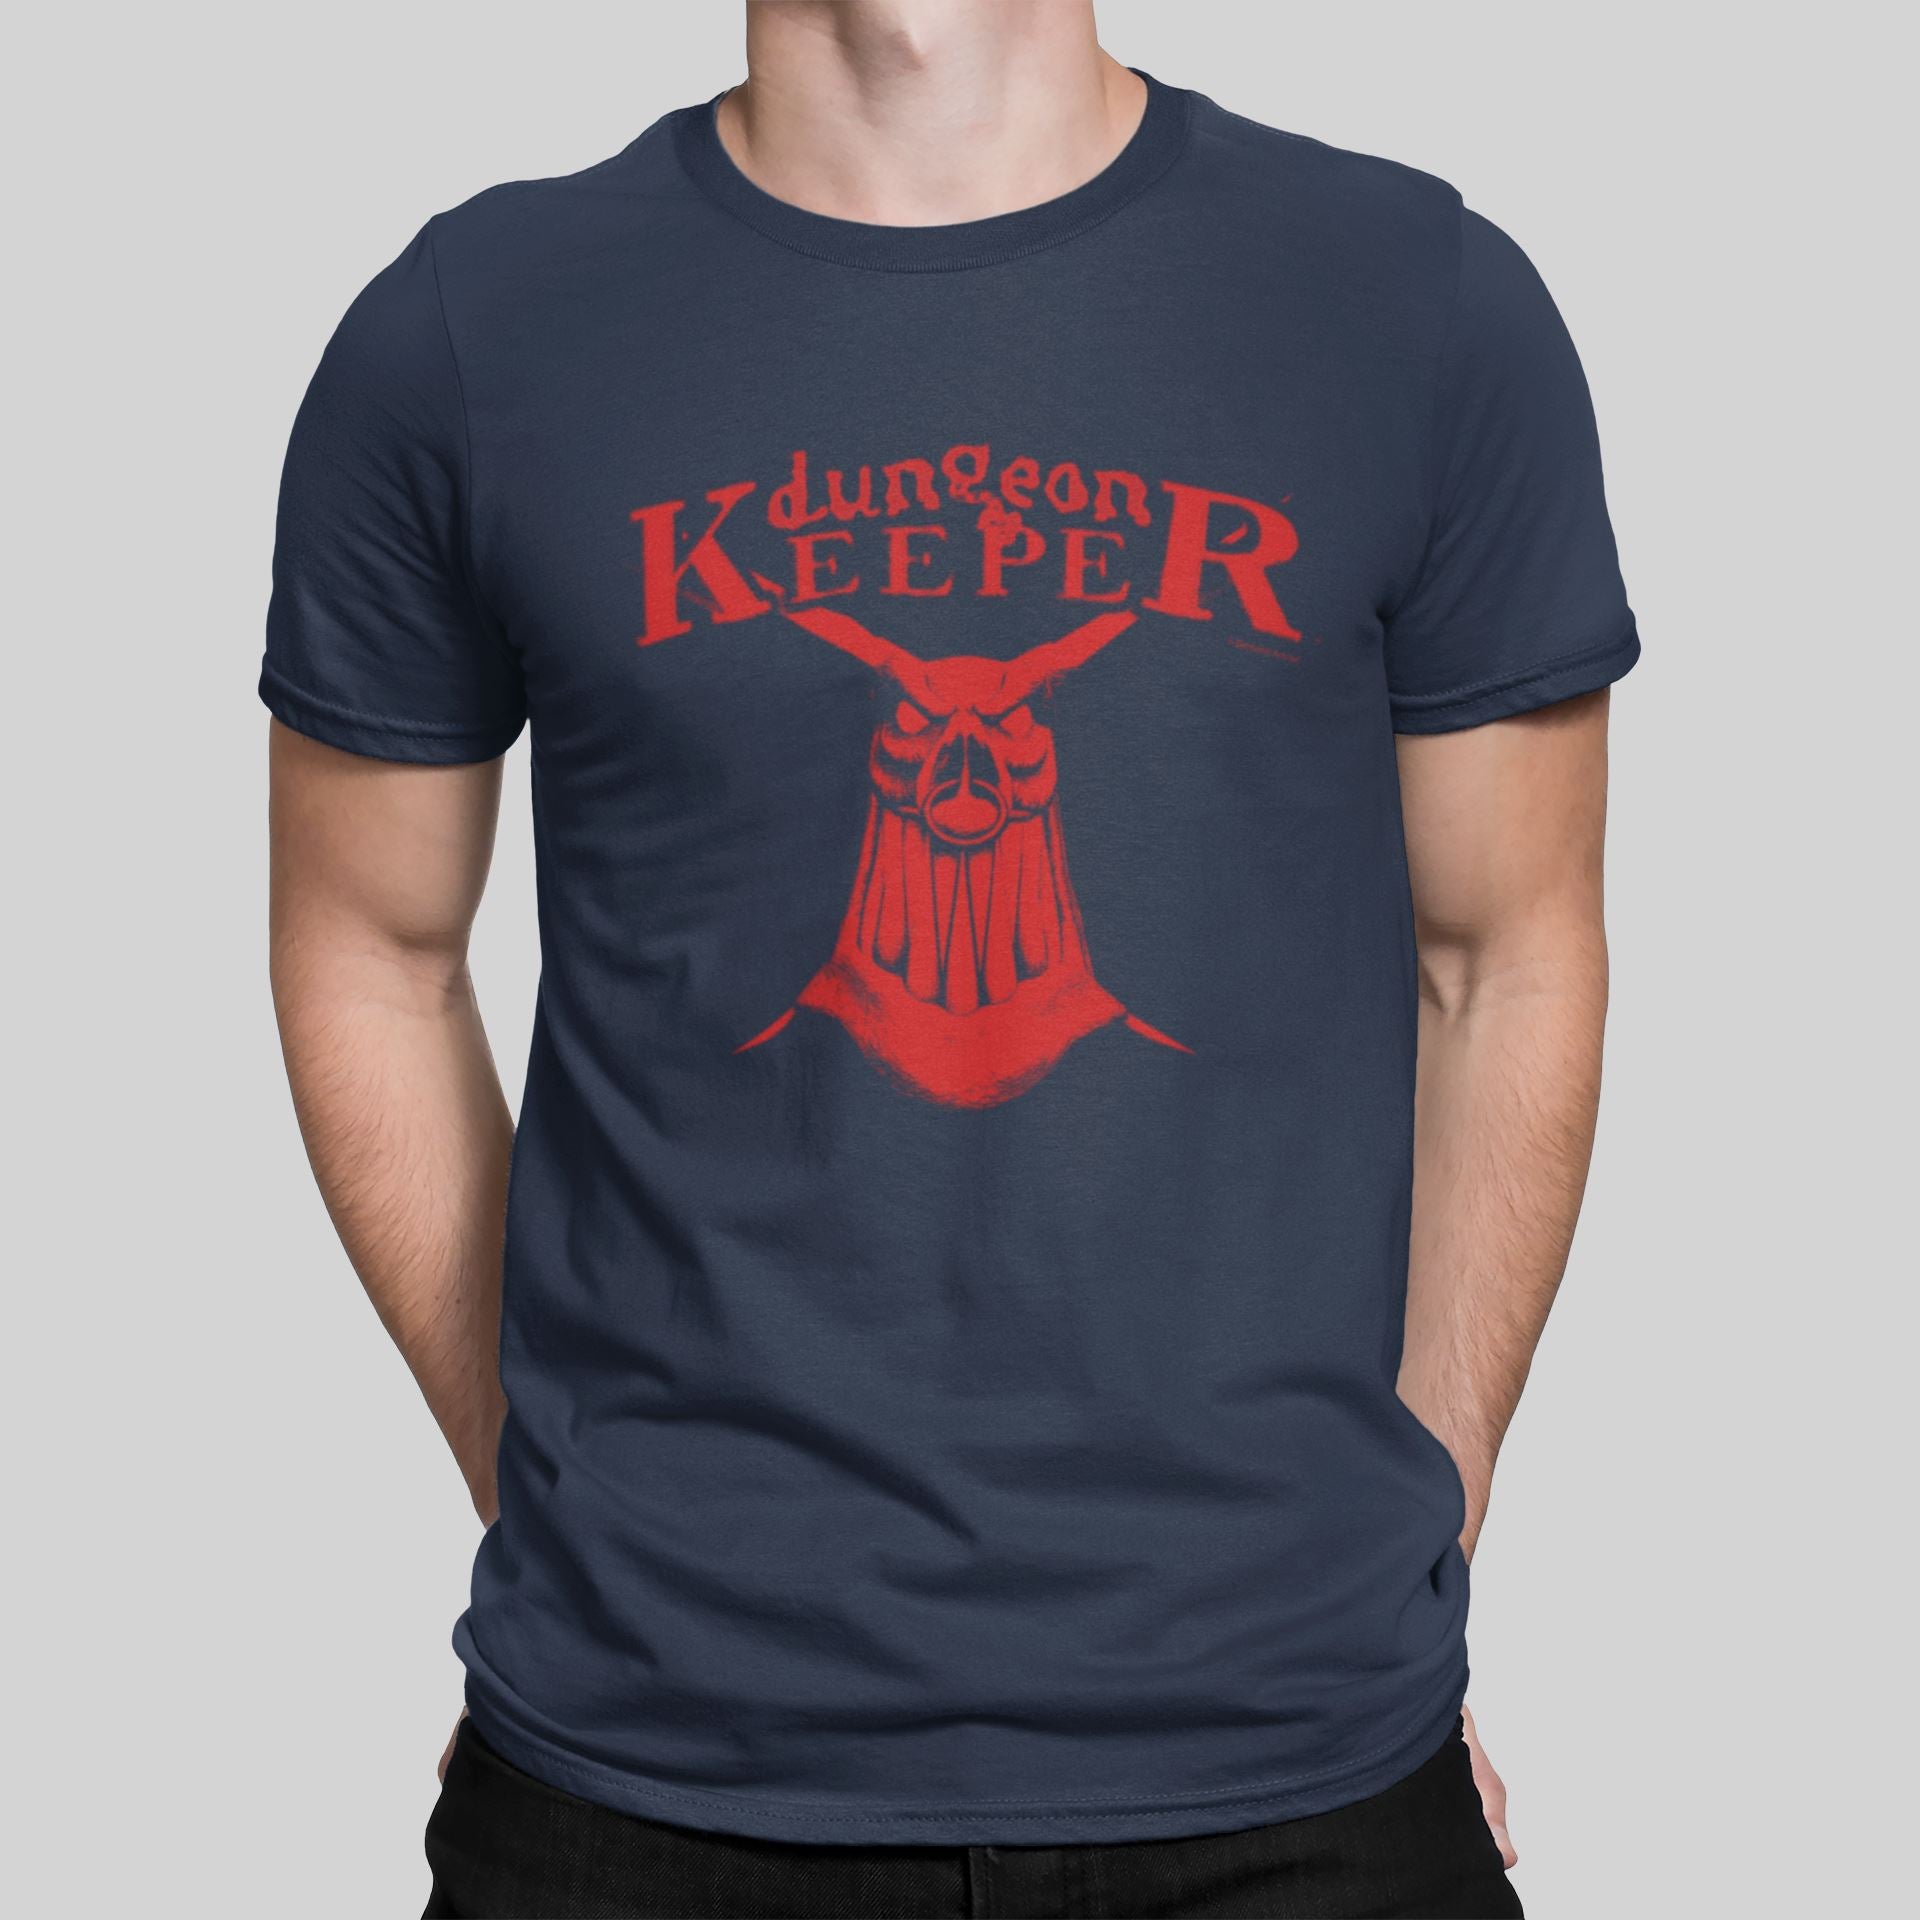 Dungeon Keeper Retro Gaming T-Shirt SIOW Edition T-Shirt Seven Squared Small 34-36" Navy Blue 